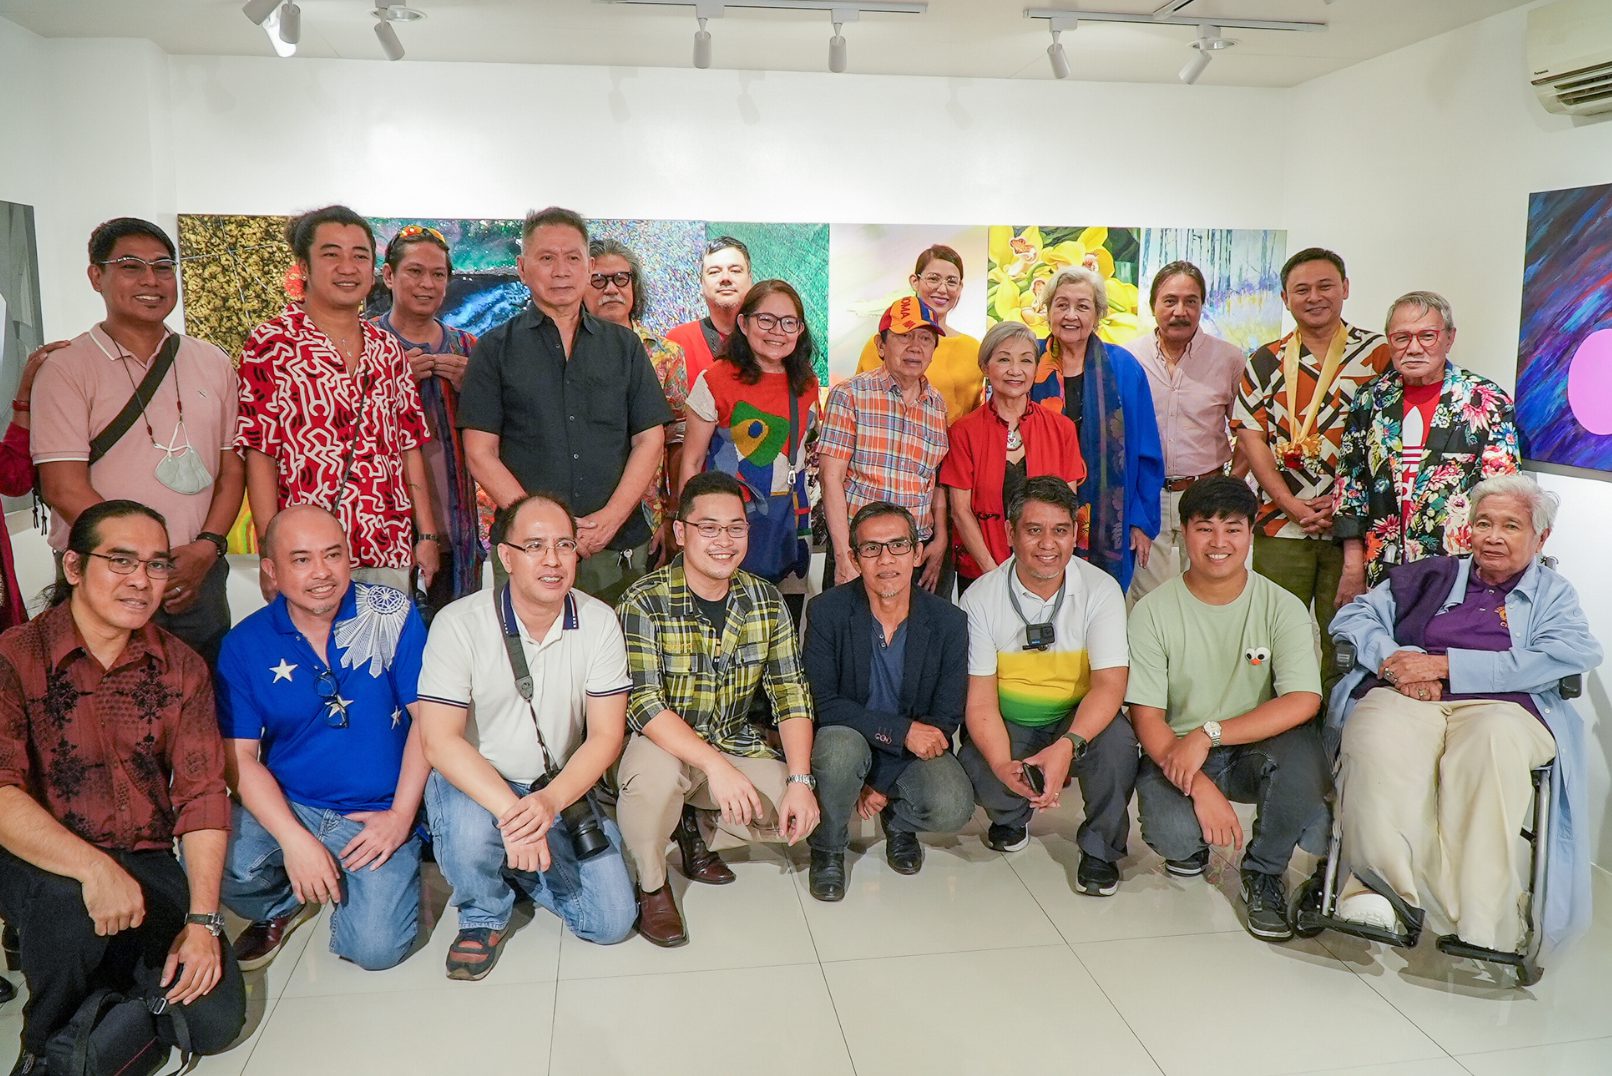 The participating artists in the year-ender exhibition of the White Room Gallery pose for a photo.